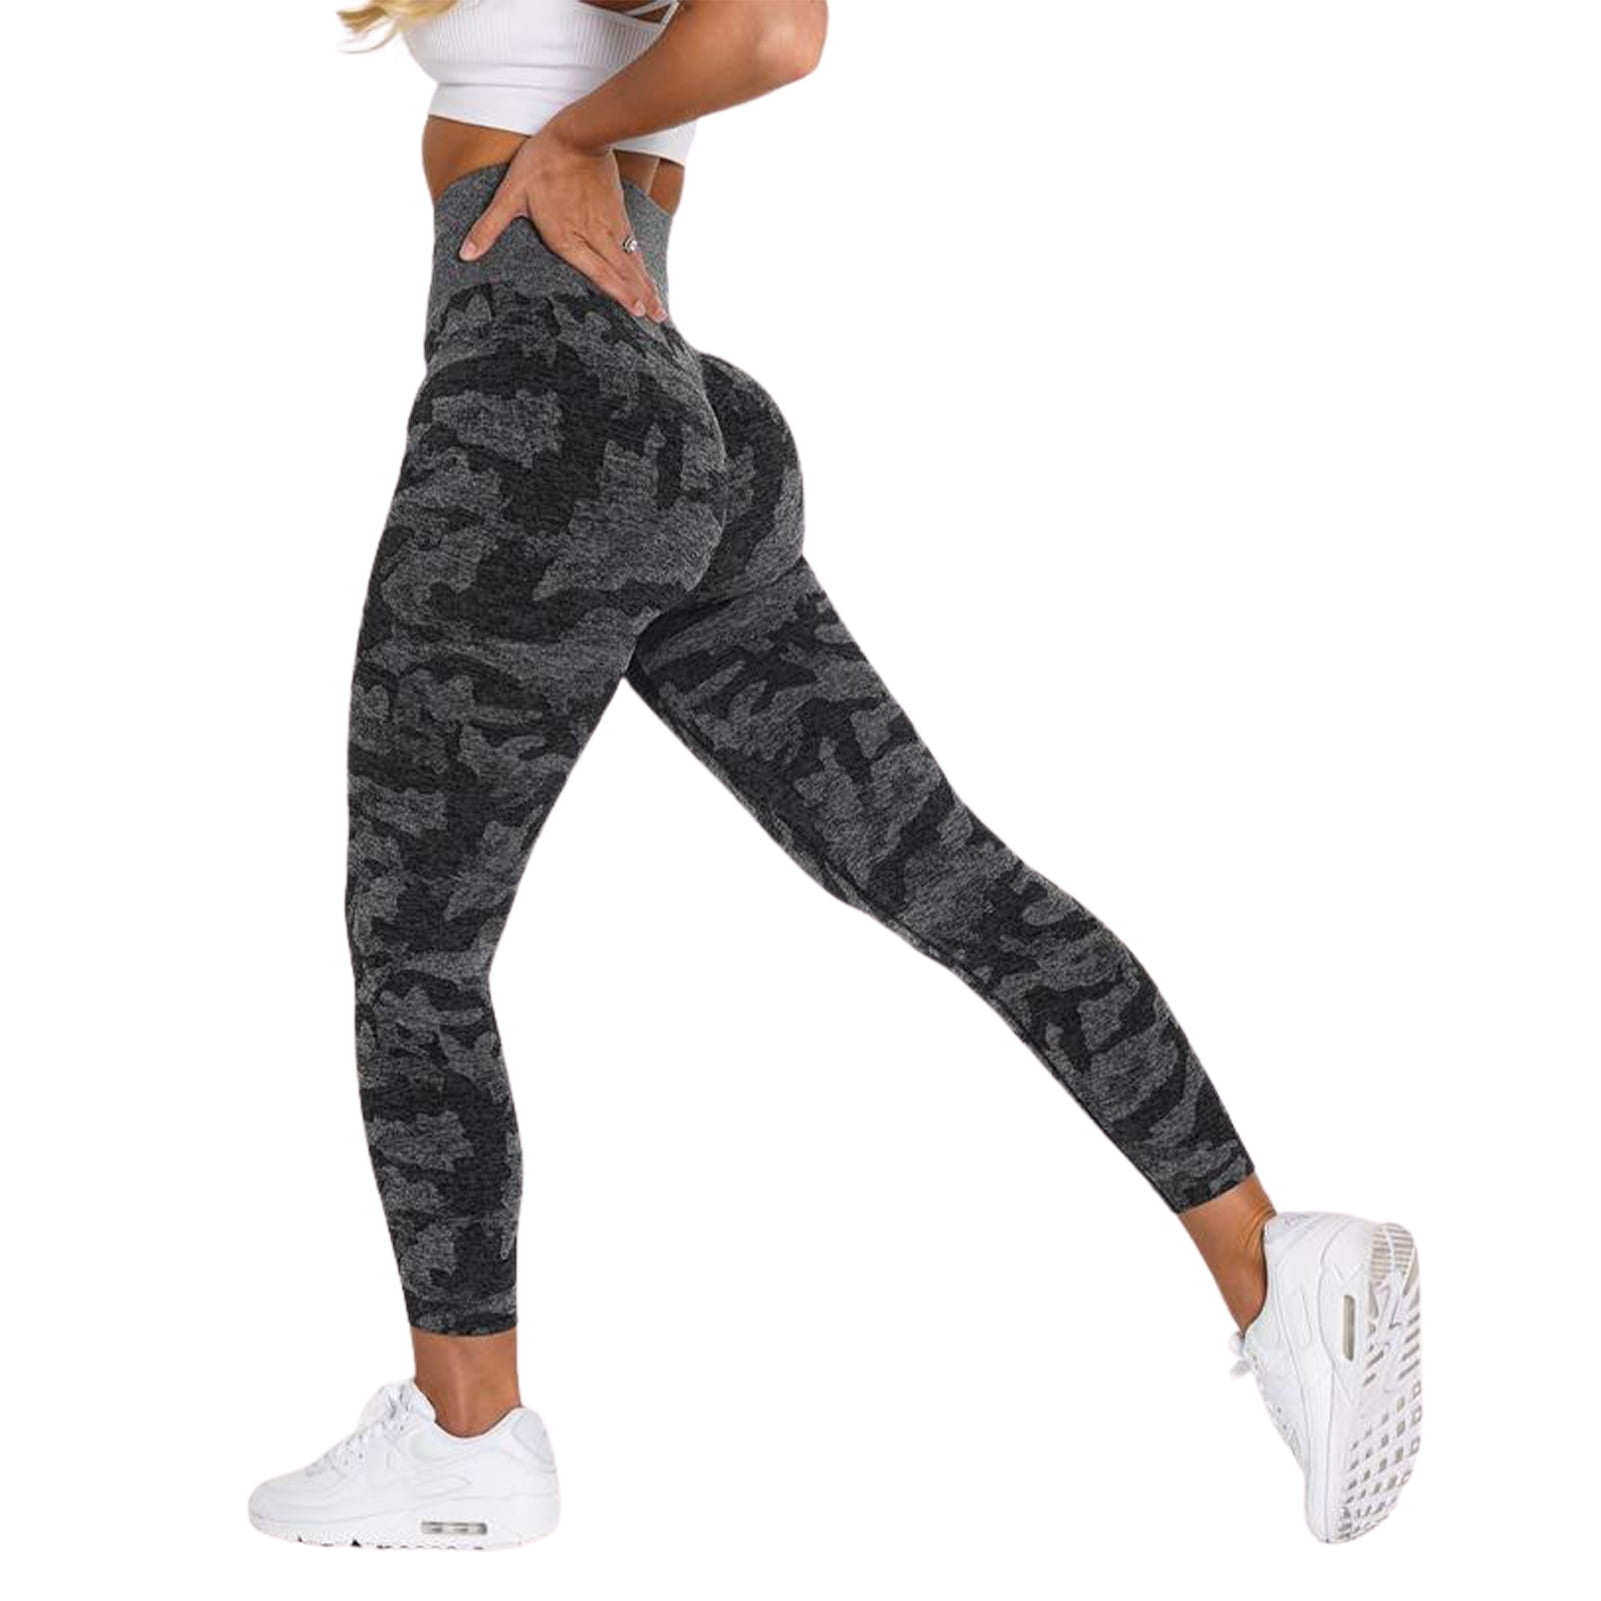 Details about   Women Printed Yoga Pants High Waist Gym Fitness Leggings Sports Running Trousers 